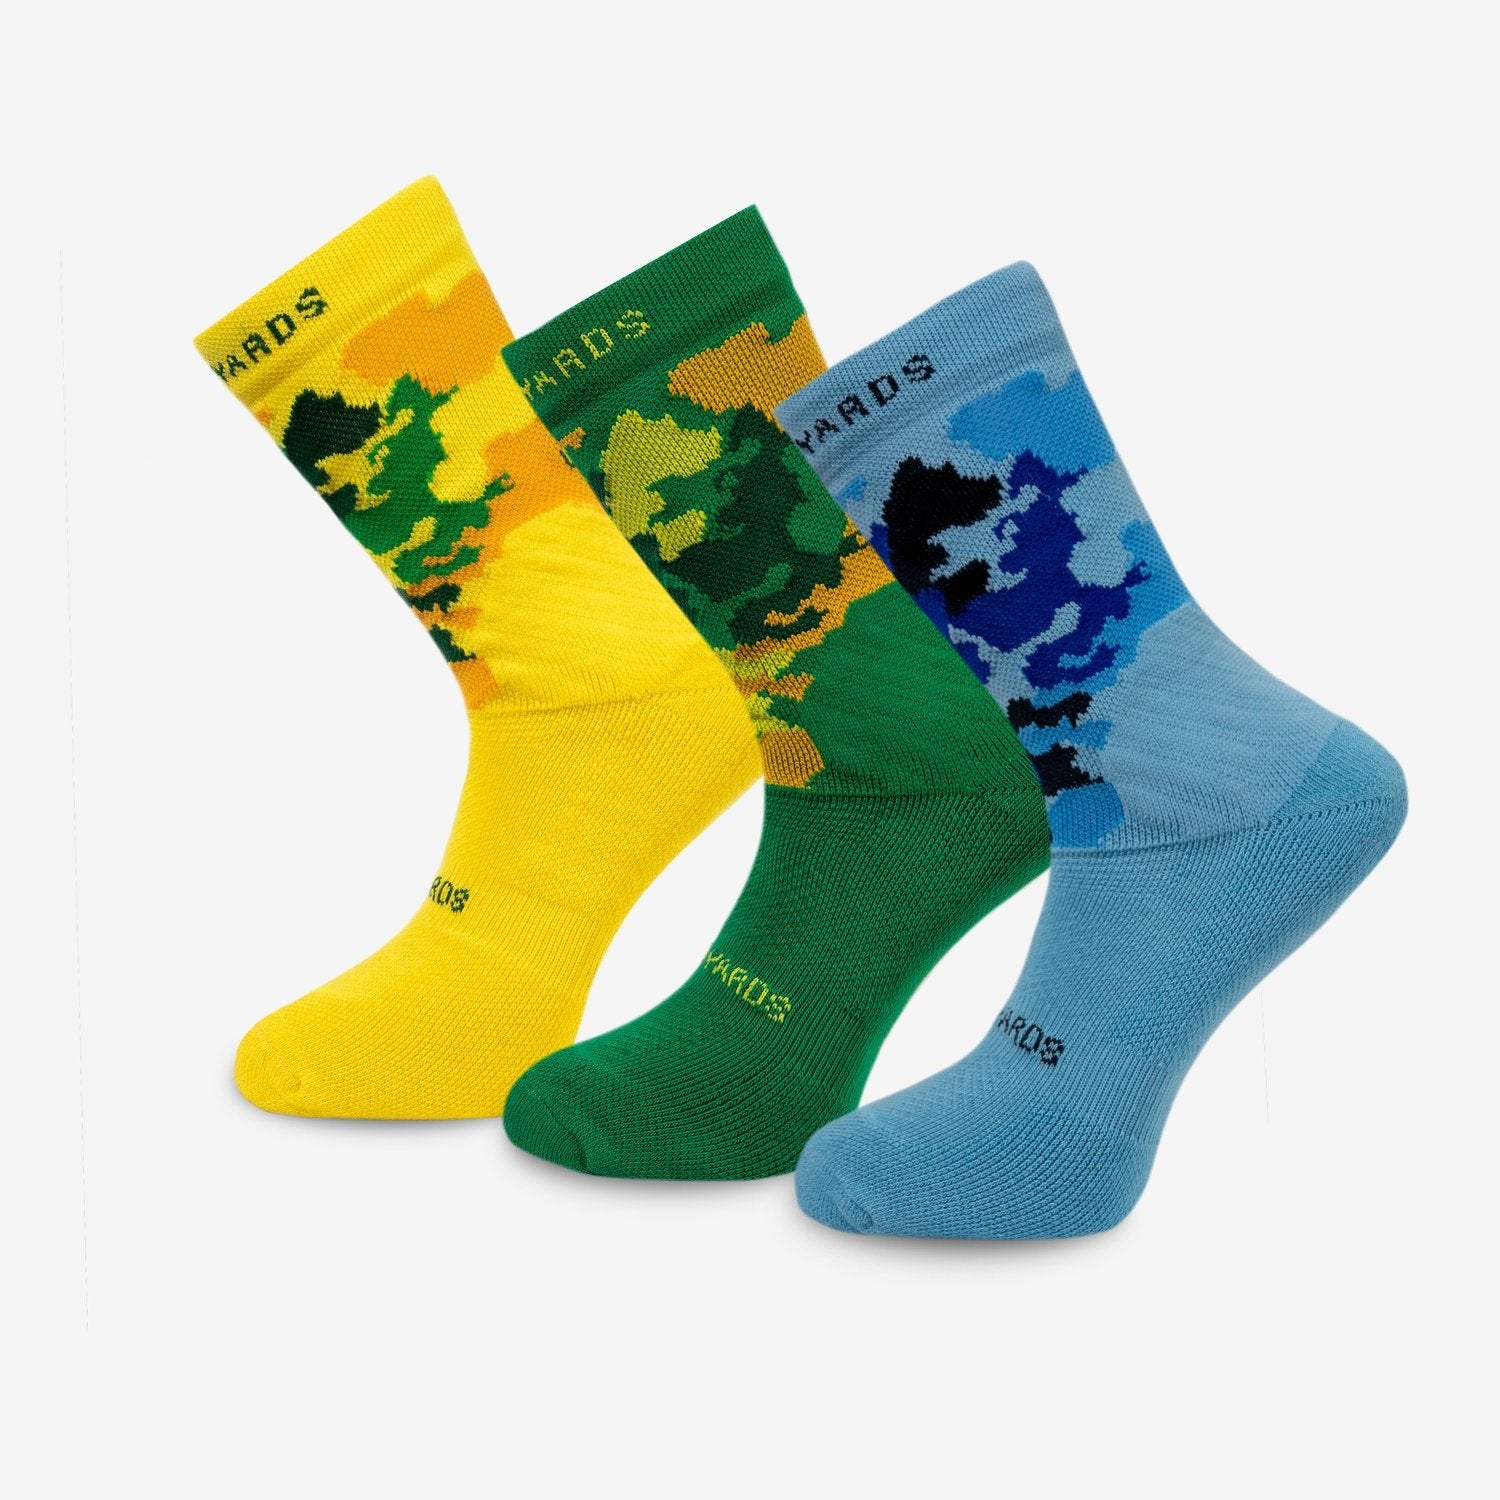 Hard Yards The Original 365 Pro Sock (Limited Edition S-23) - The Cricket Store